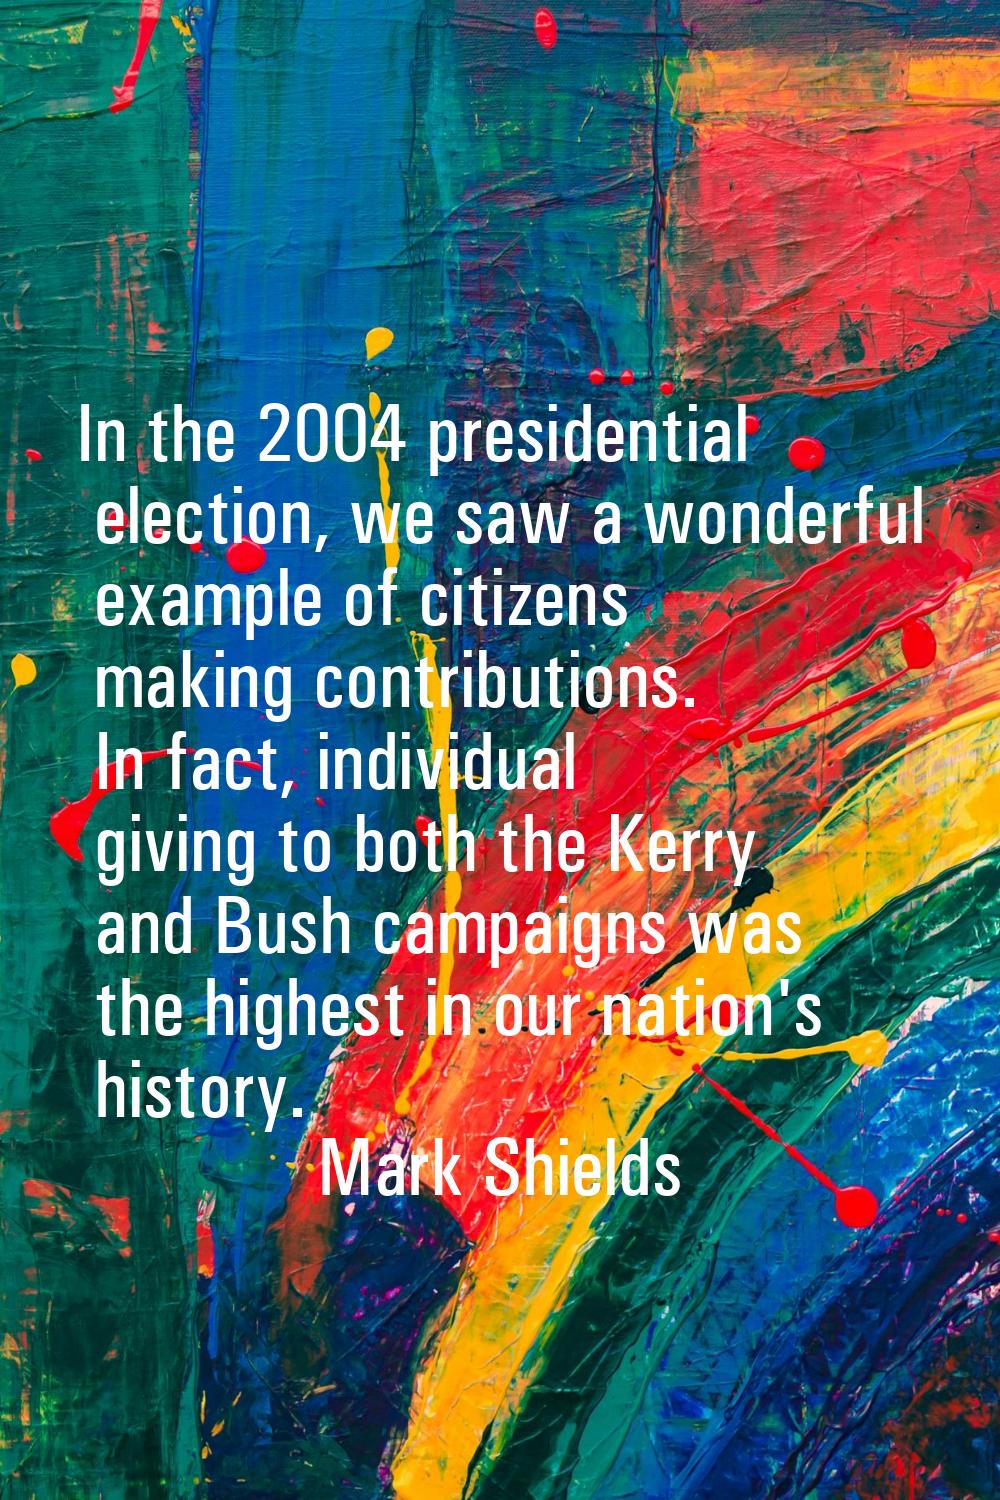 In the 2004 presidential election, we saw a wonderful example of citizens making contributions. In 